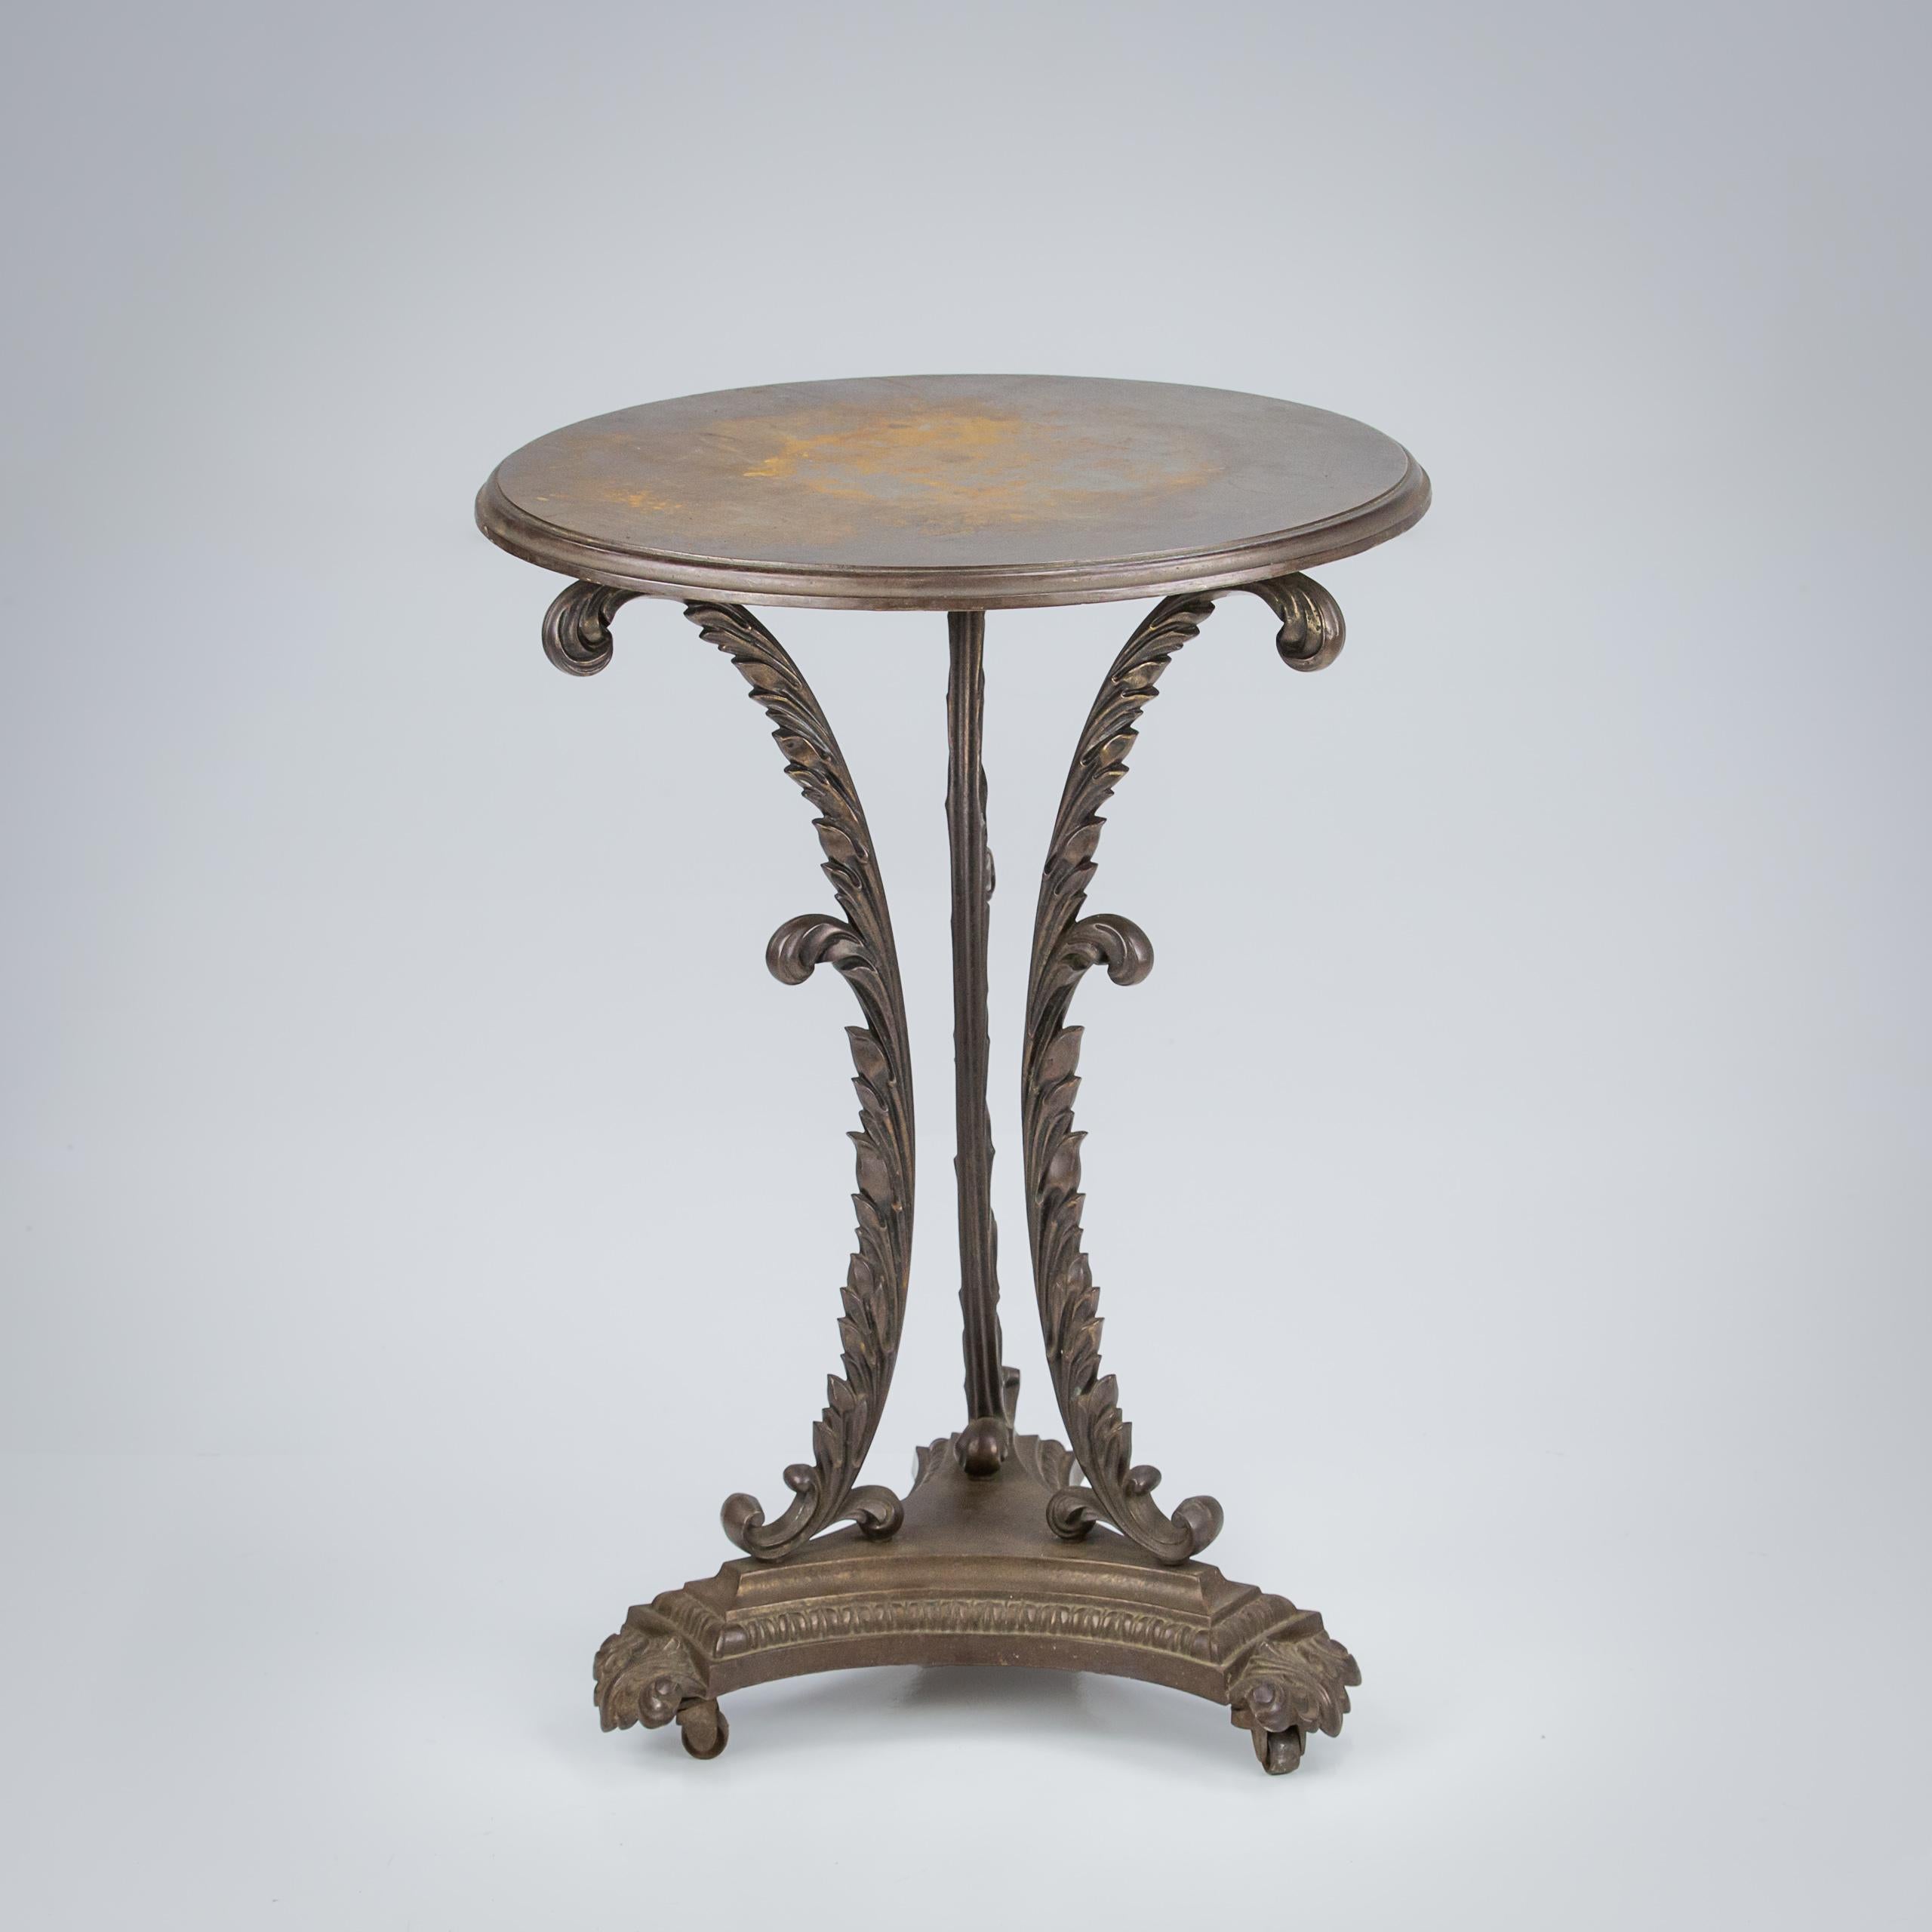 Early 20th Century Iron conservatory table, on original castors, excellent casting.

Unusual patination.

England, Circa 1920.